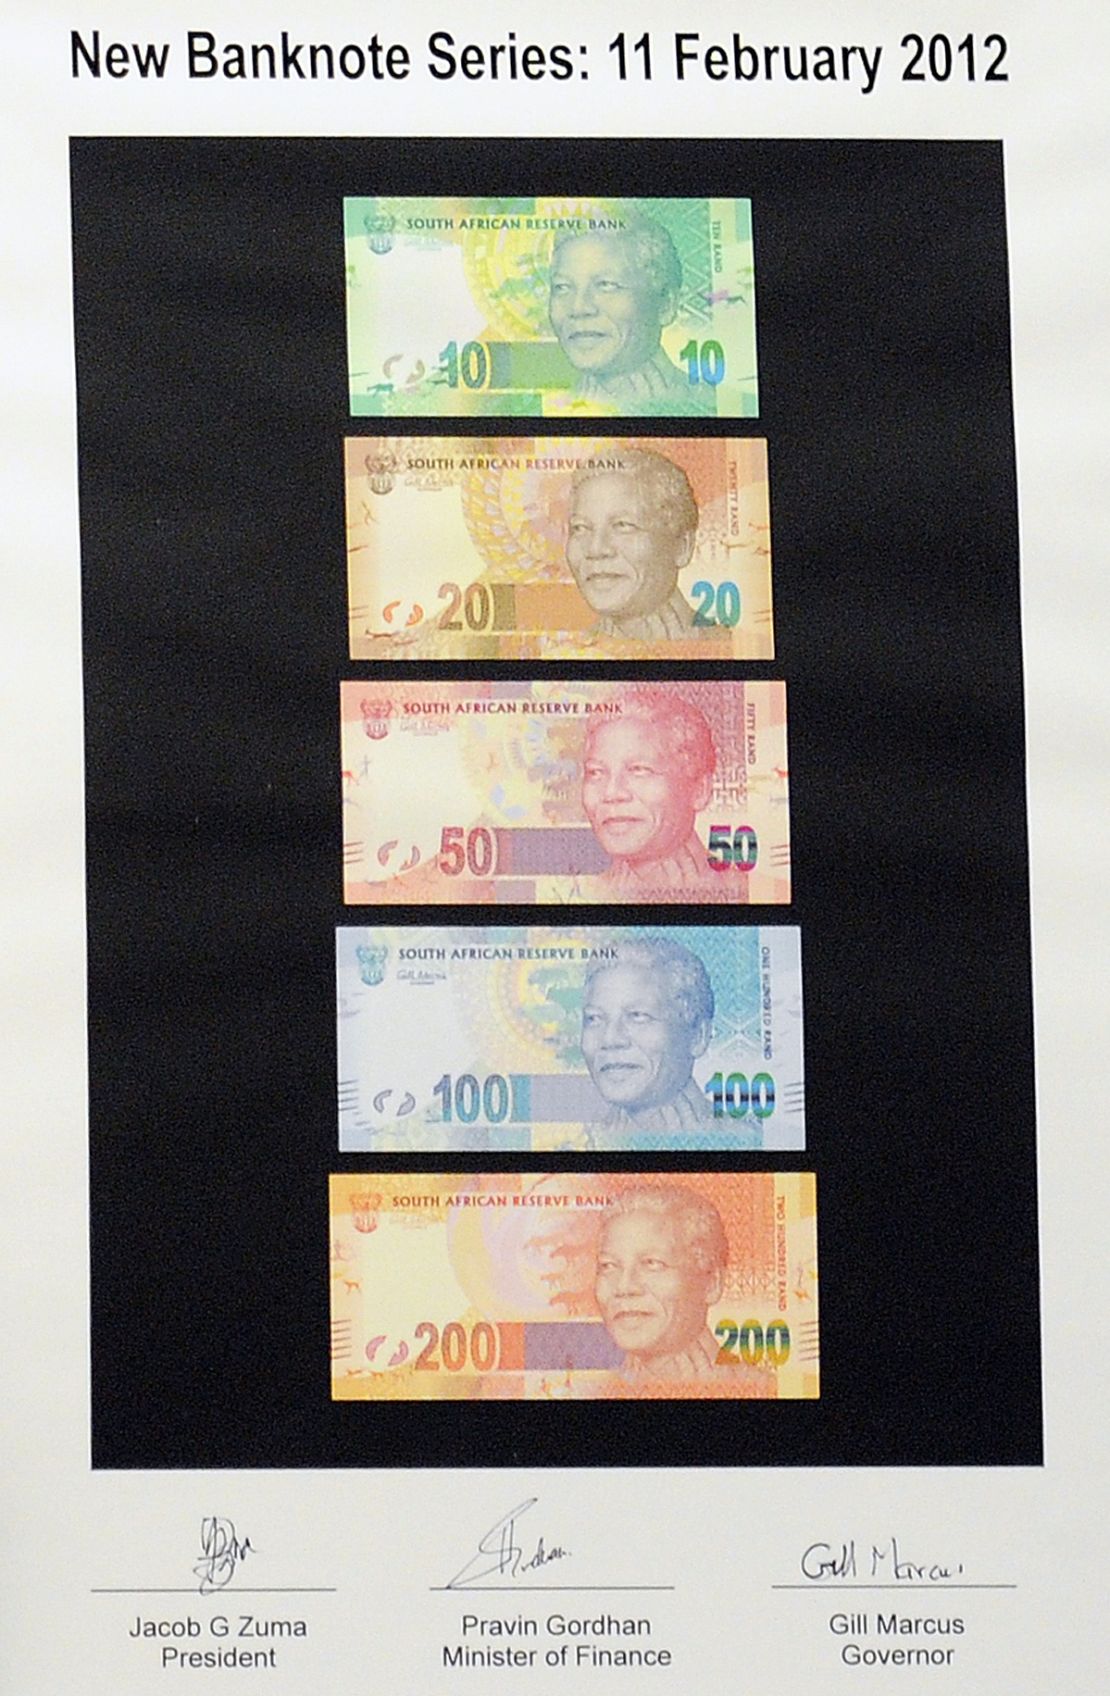 The banknotes feature a picture of the former president.